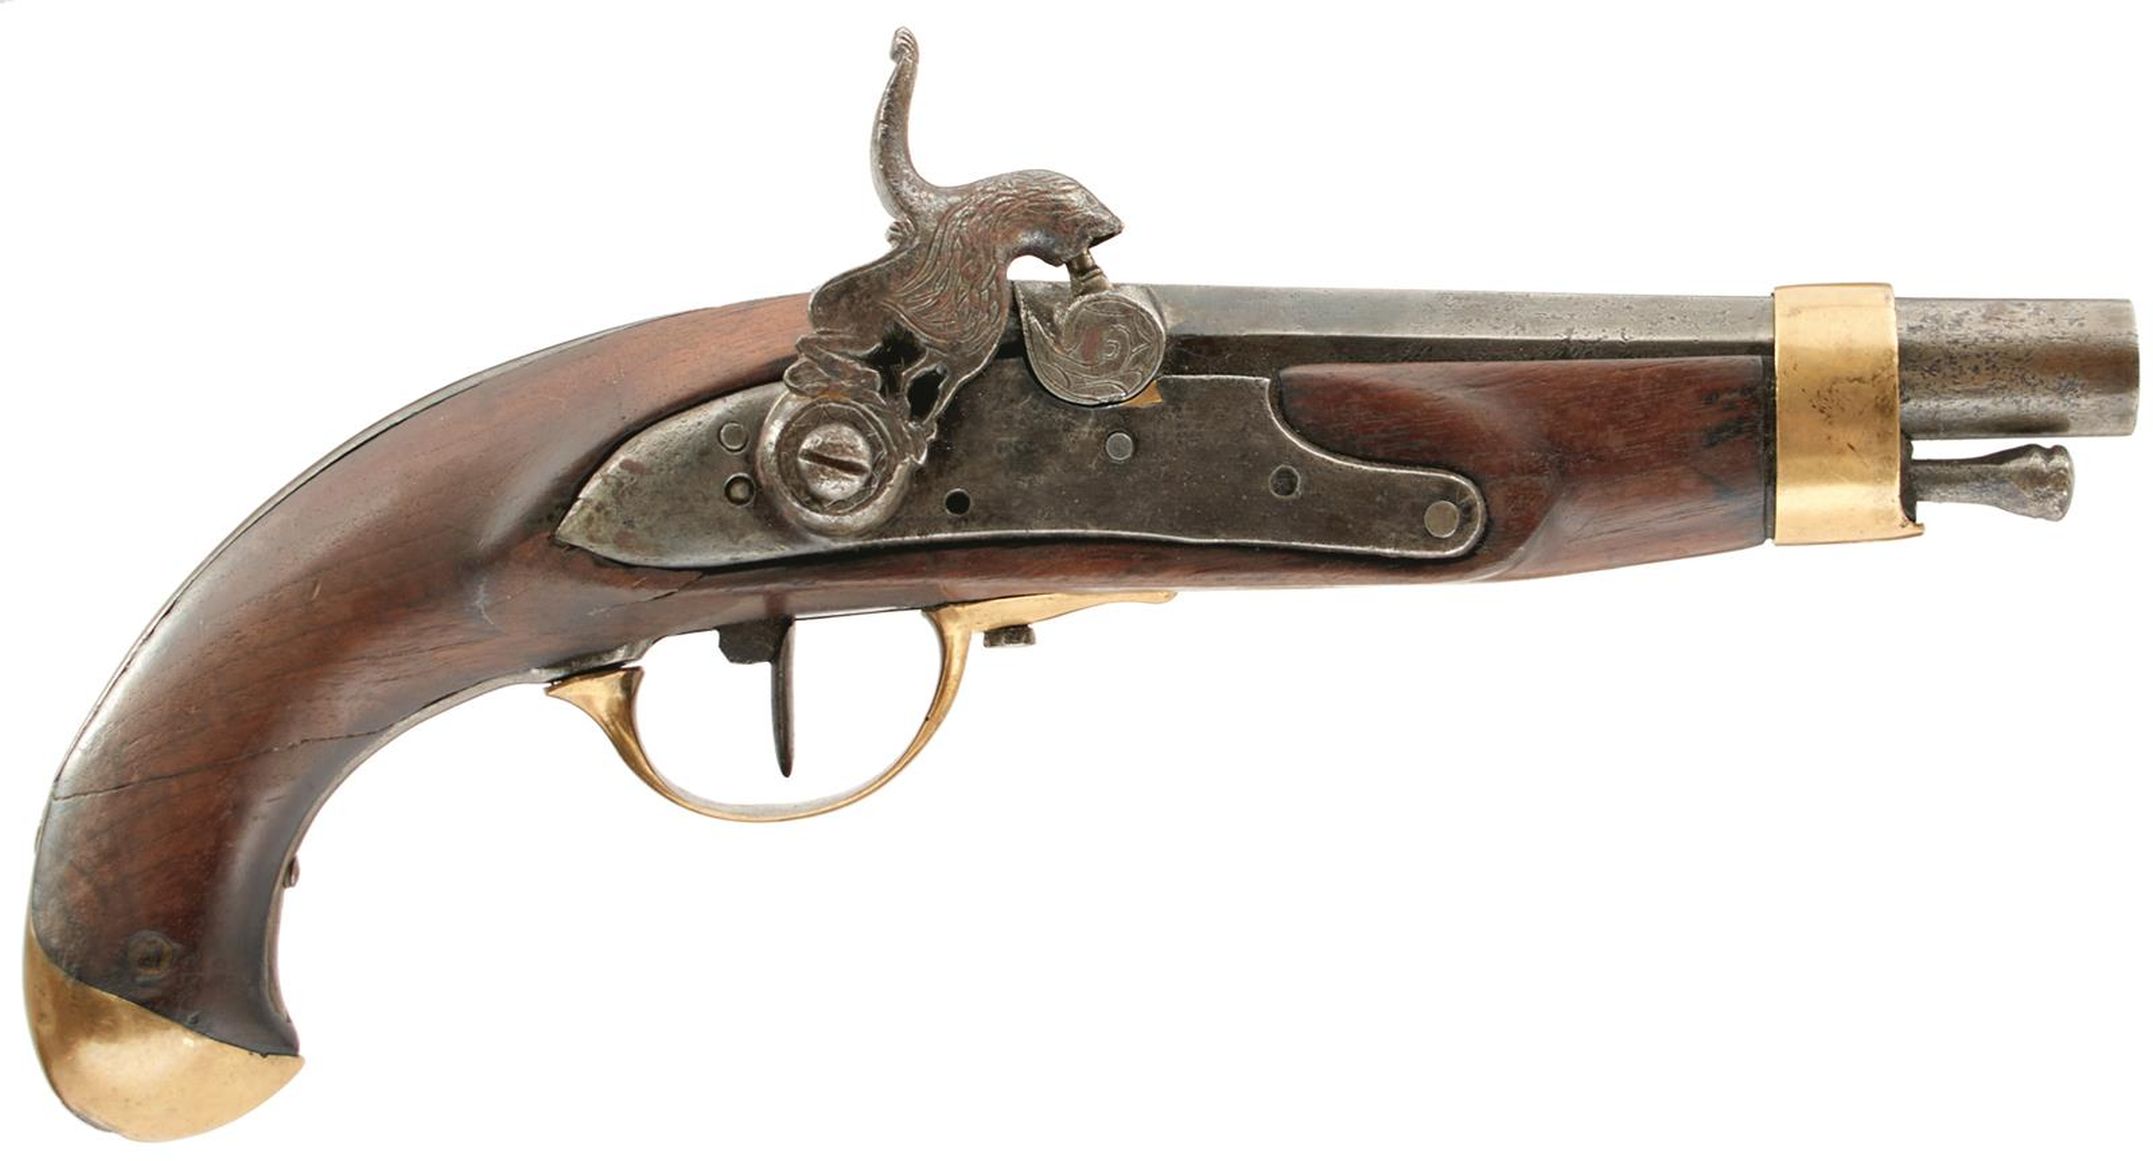 A SPANISH 13-BORE PERCUSSION SERVICE PISTOL, 6.5inch barrel, bevelled lock converted from flintlock,